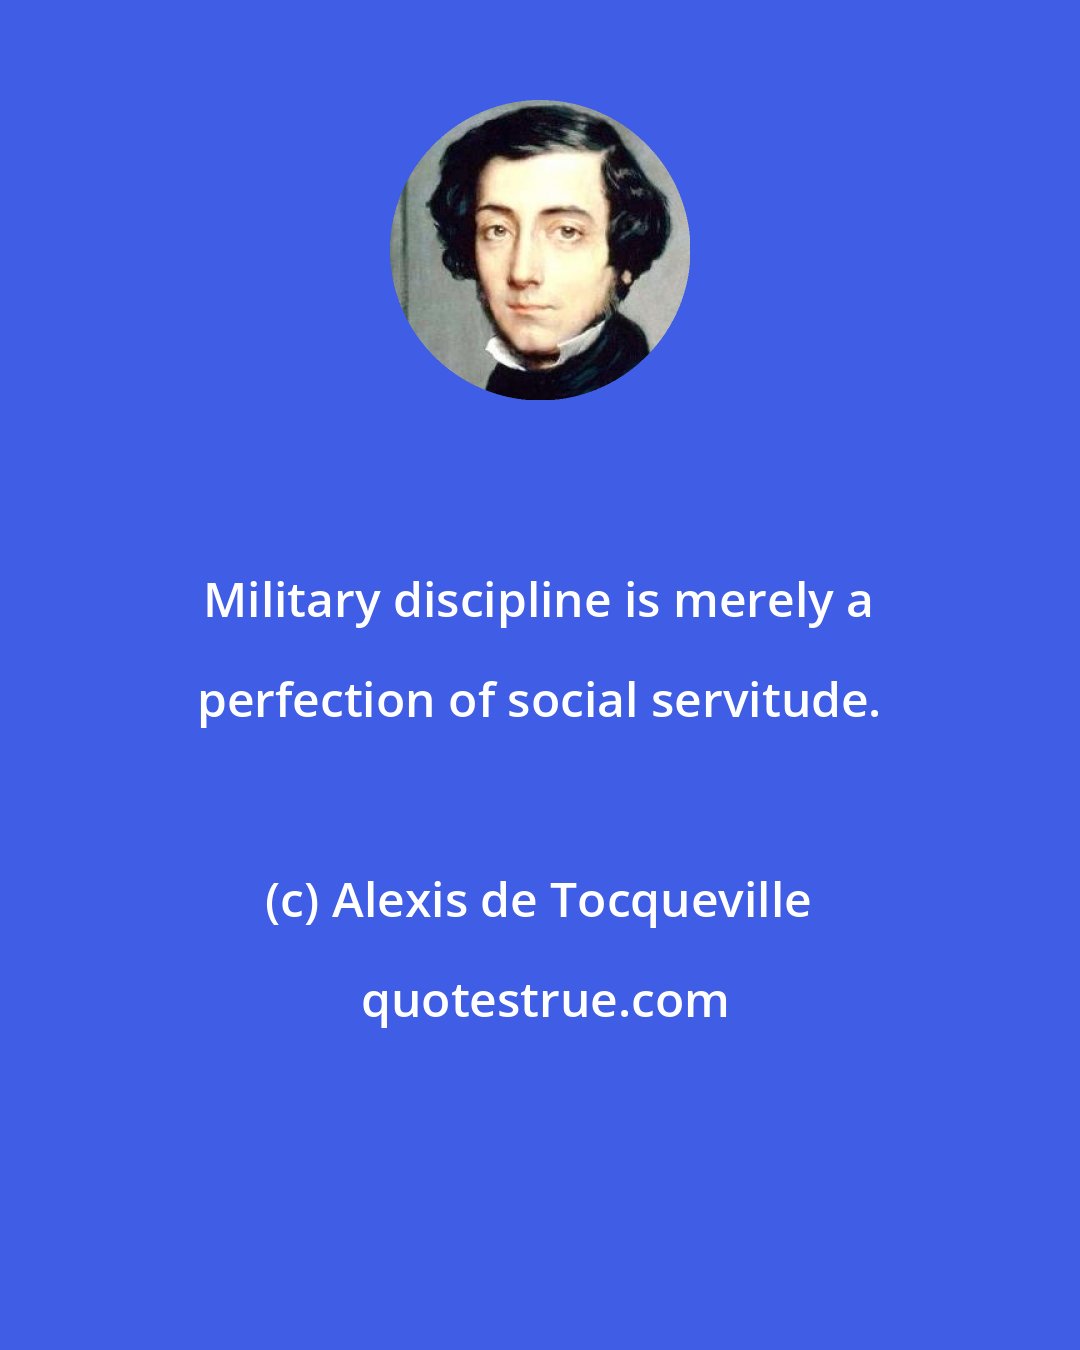 Alexis de Tocqueville: Military discipline is merely a perfection of social servitude.